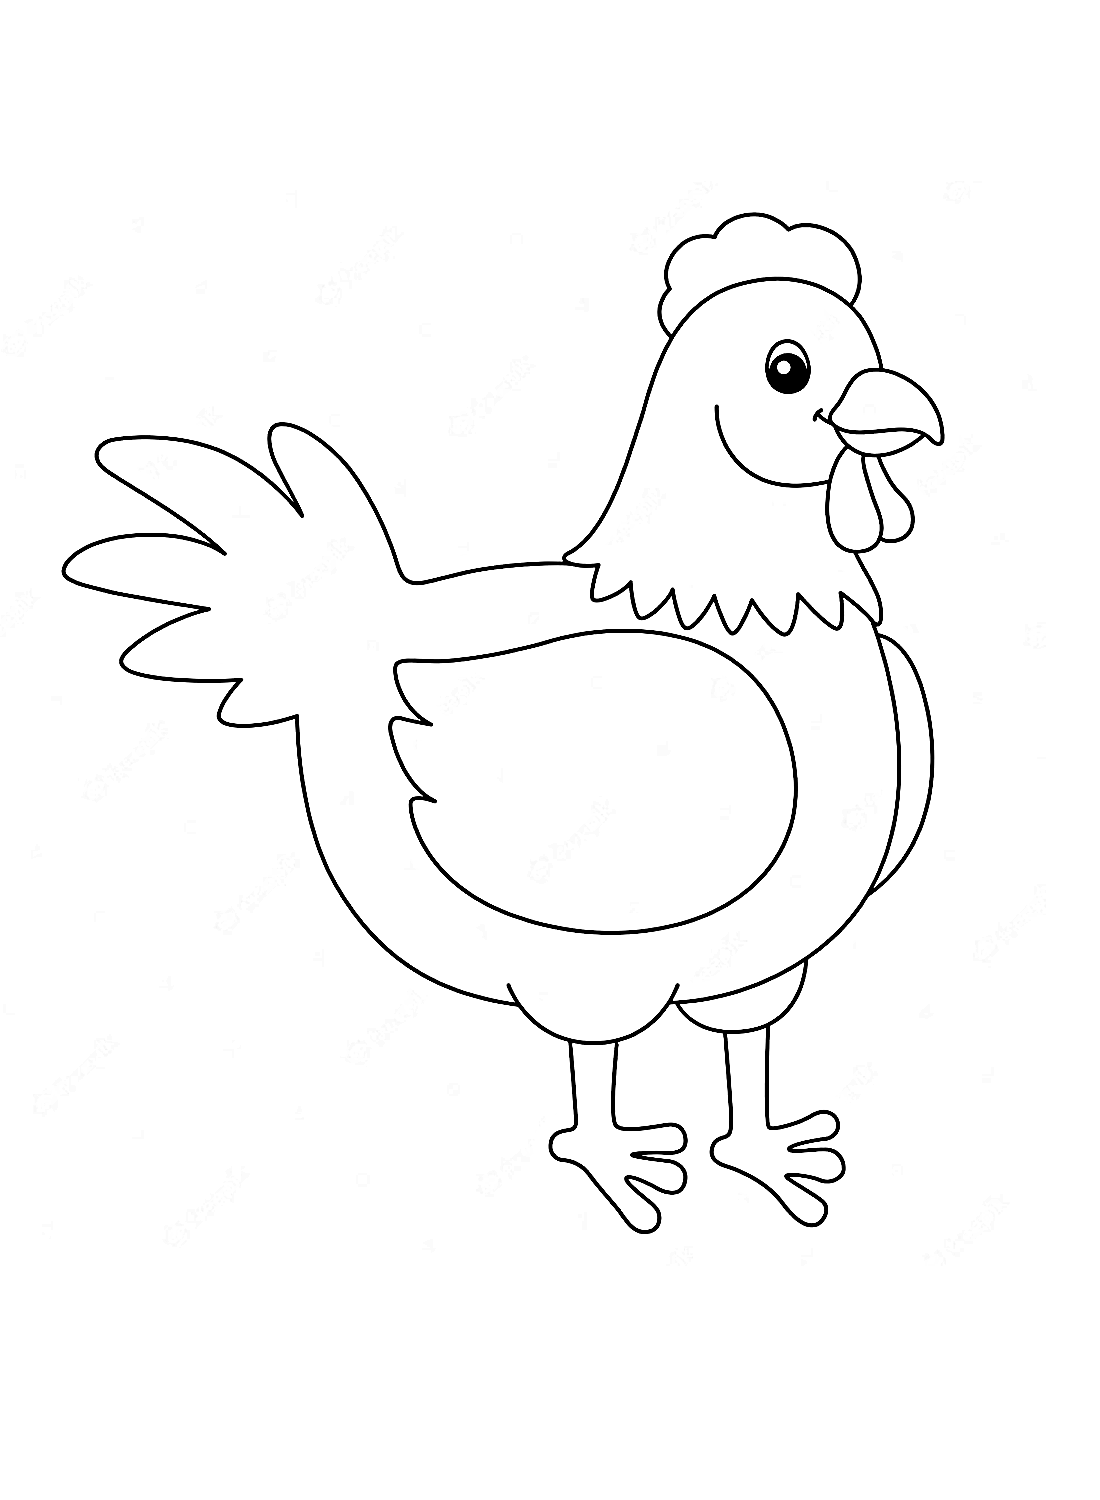 Free hen Coloring Page - Free Printable Coloring Pages